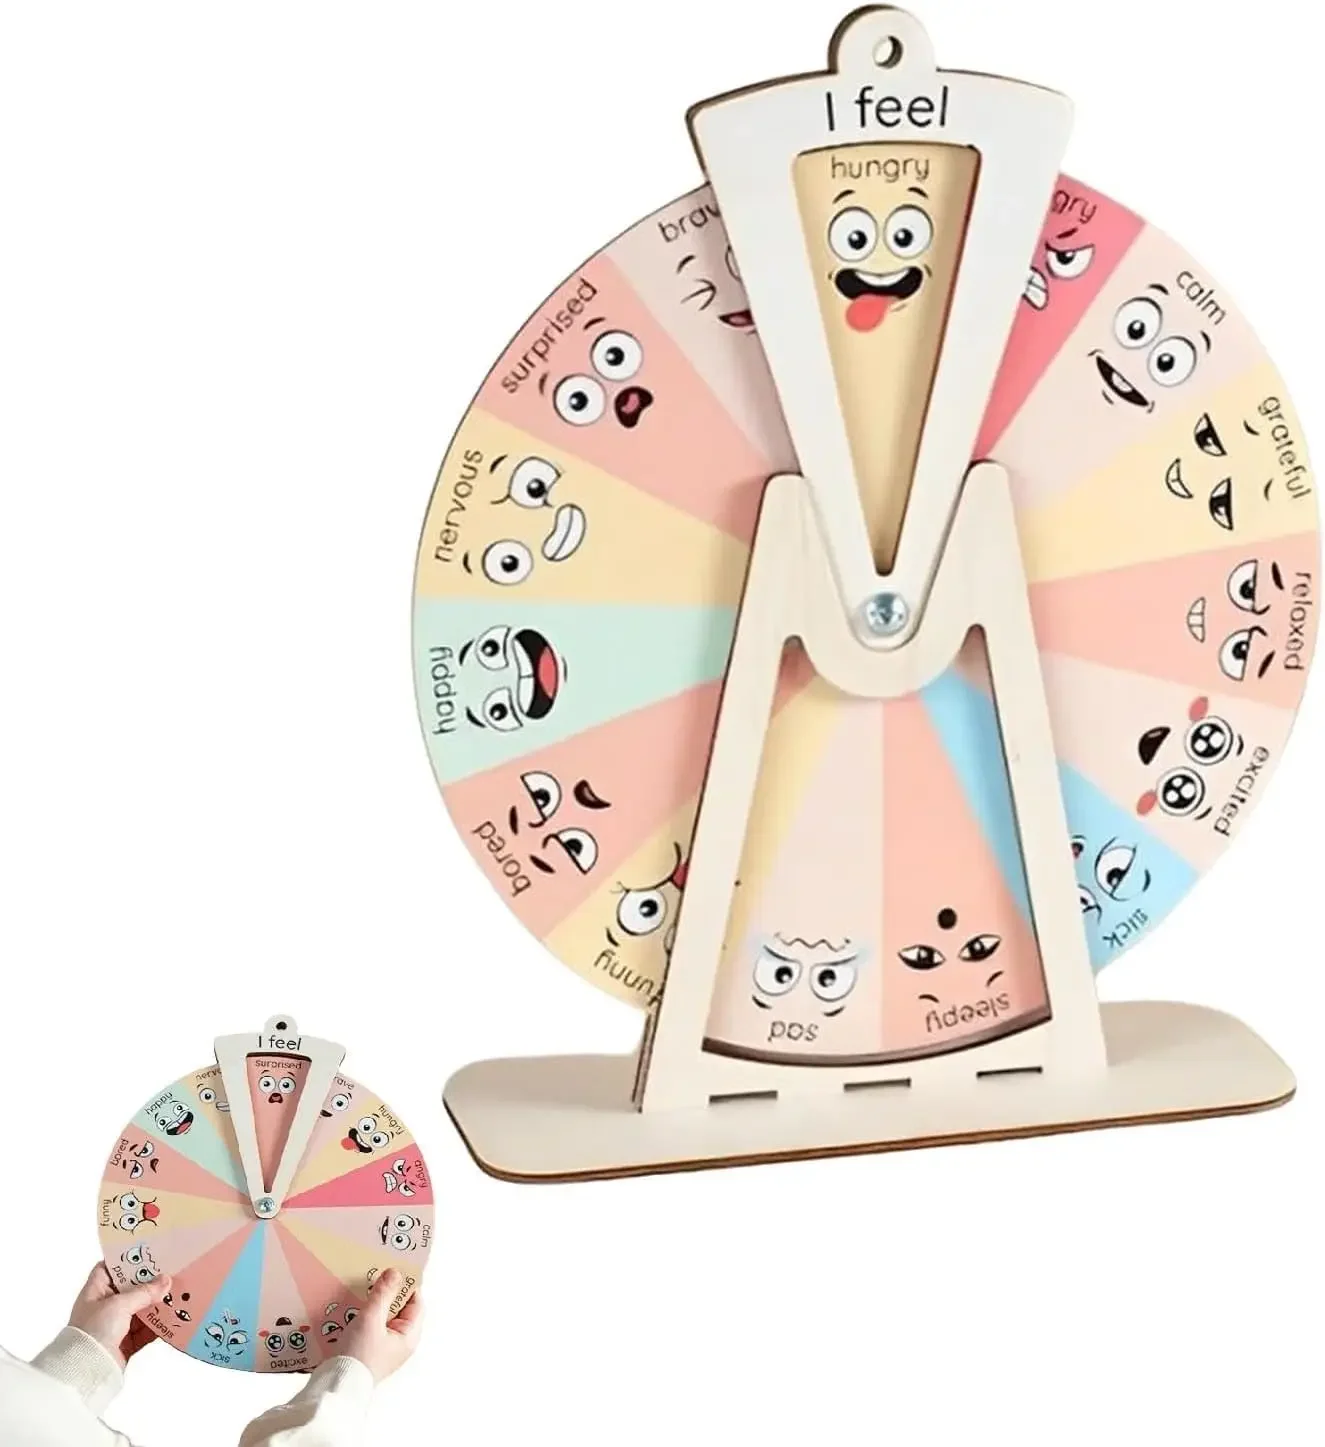 

Wooden Kids Emotion Wheel, Wooden Emotion Wheel with Base, Explore Emotions with Faces, Social-Emotional Learning Toy